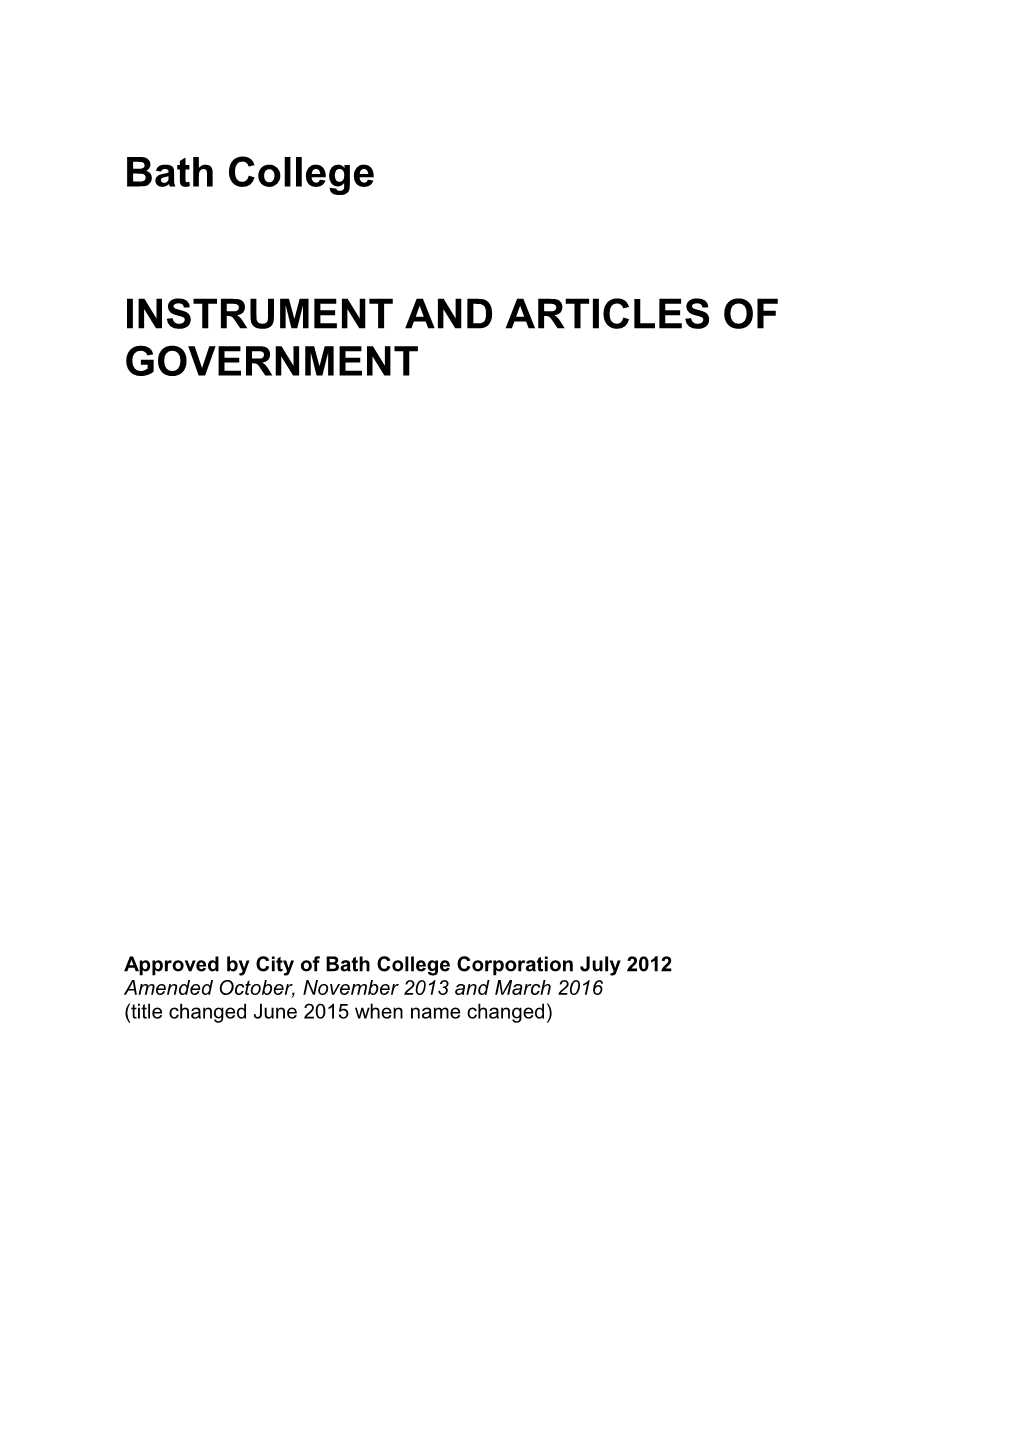 Instrument and Articles of Government